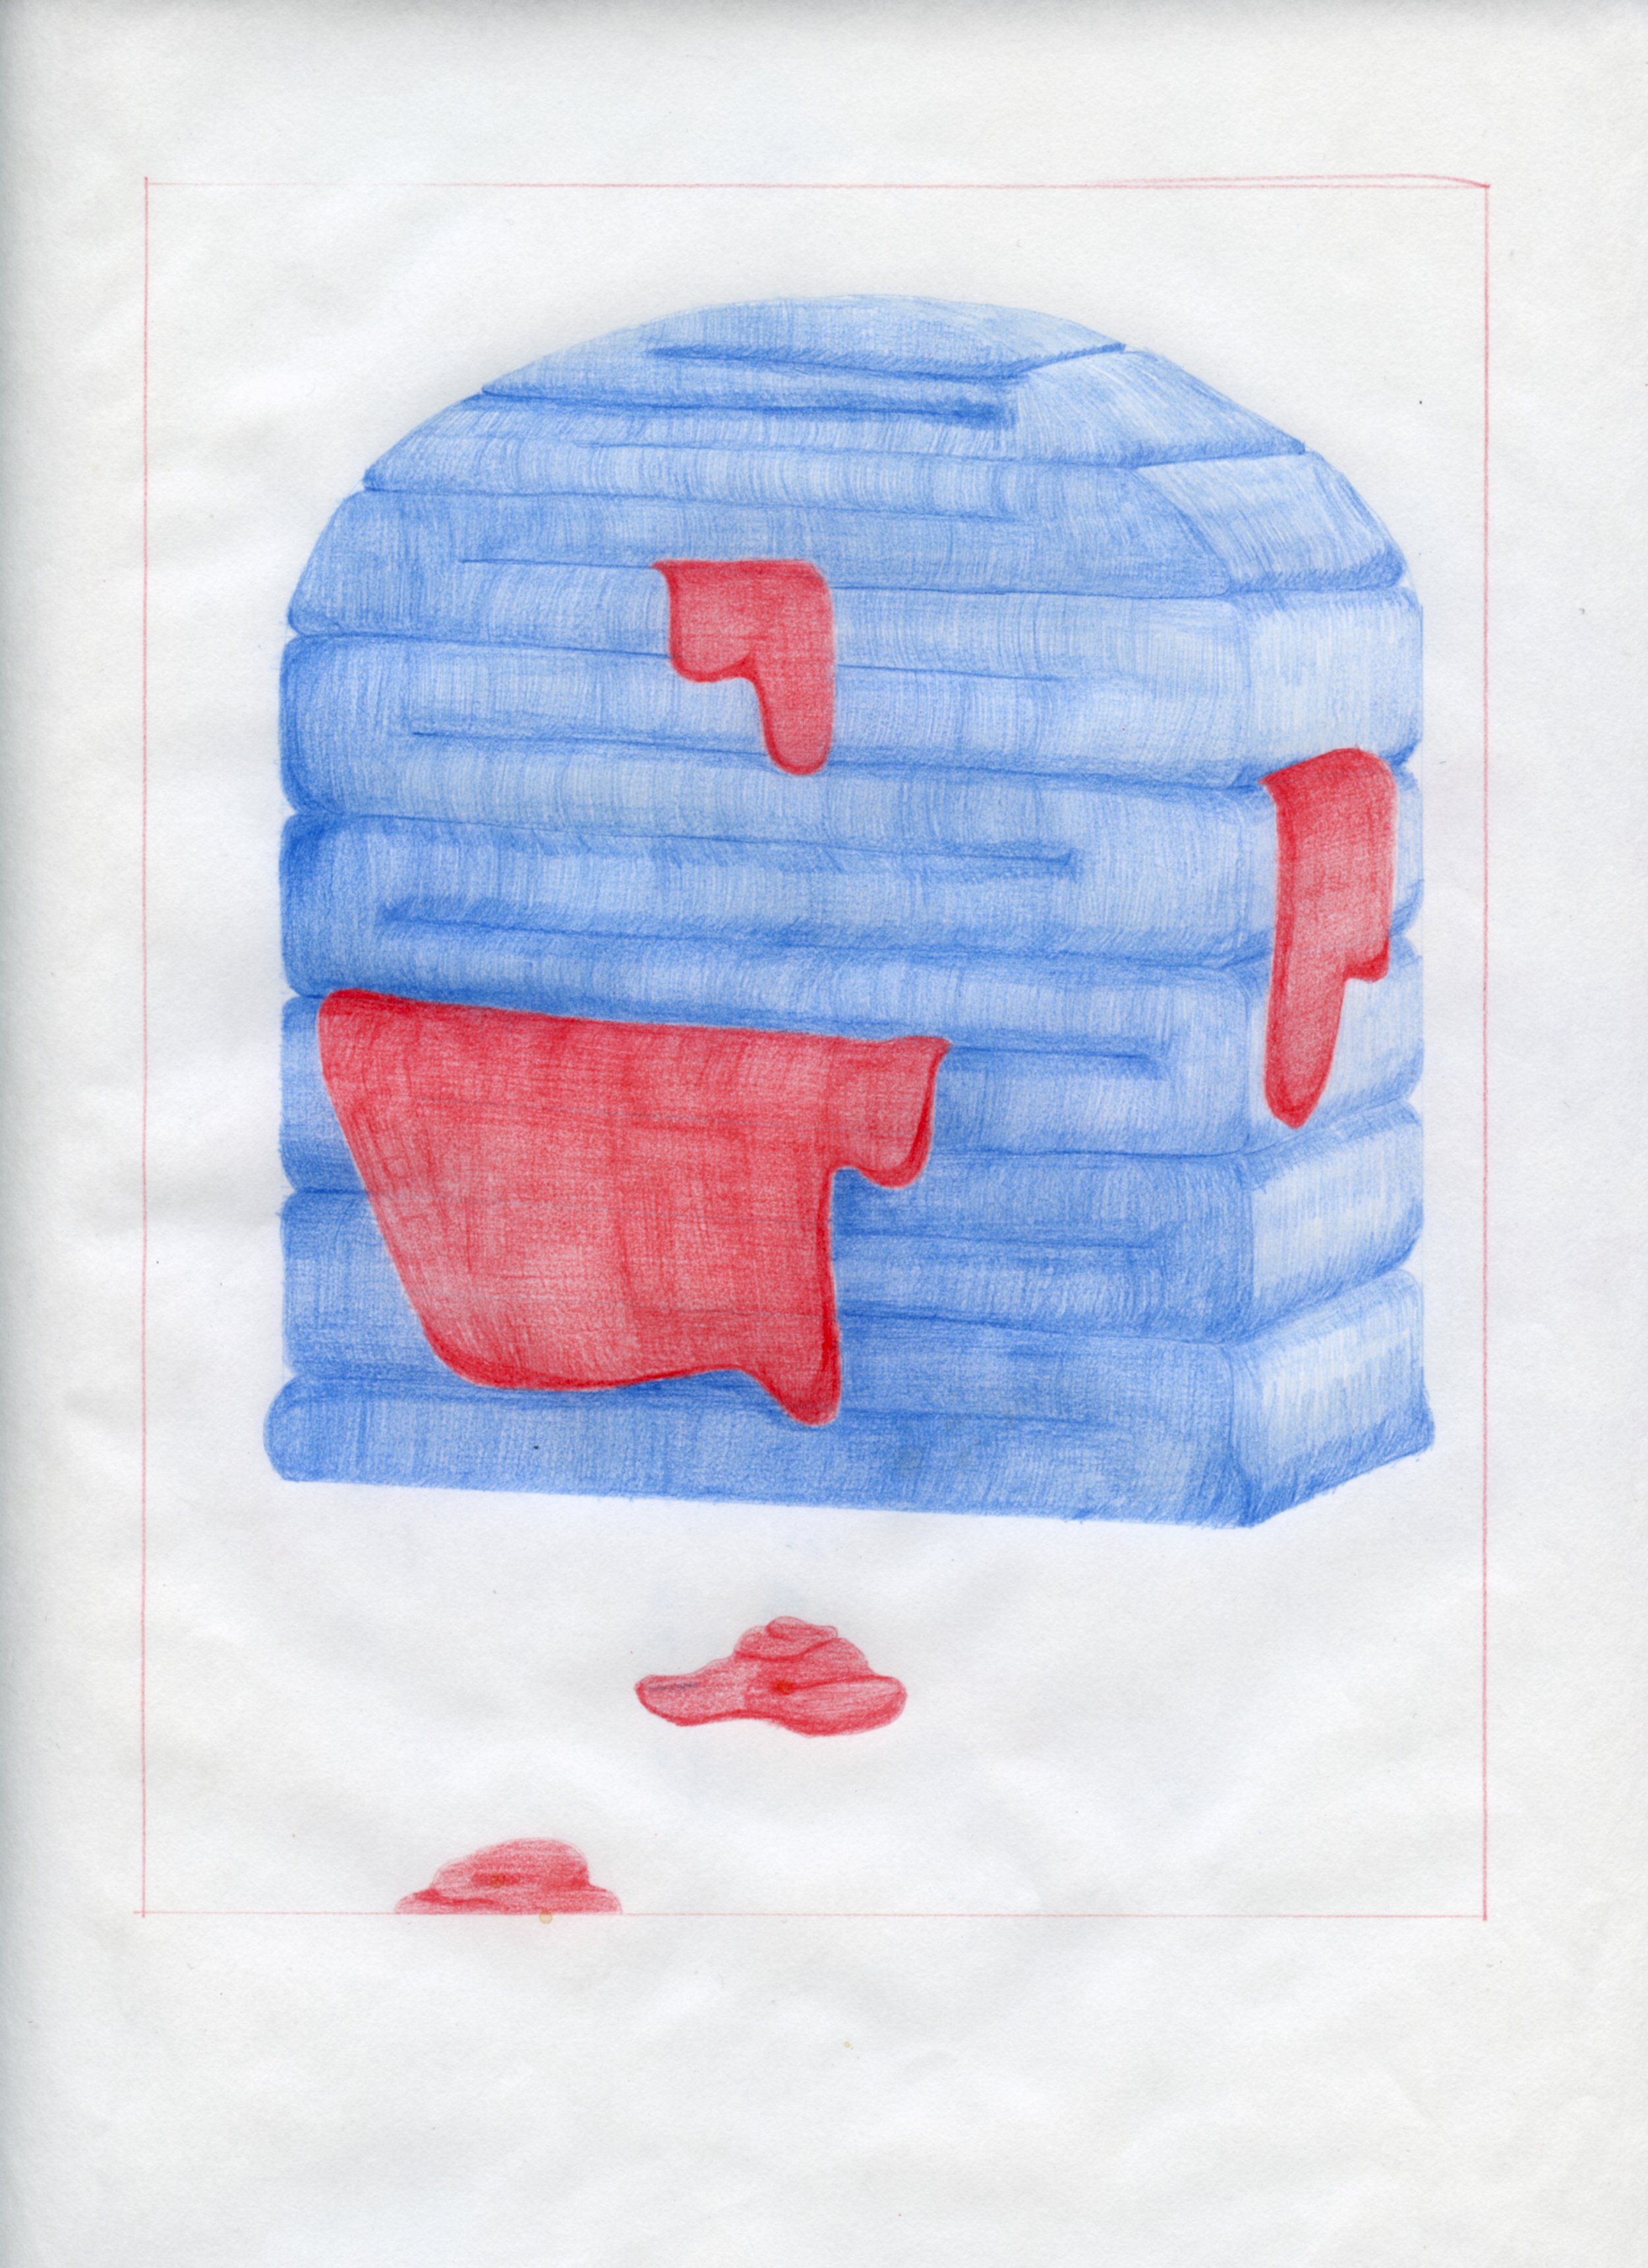  Workplace Drawing #17, 2021, Red and Blue Graphite on Bond Paper, 9”x 12”. 